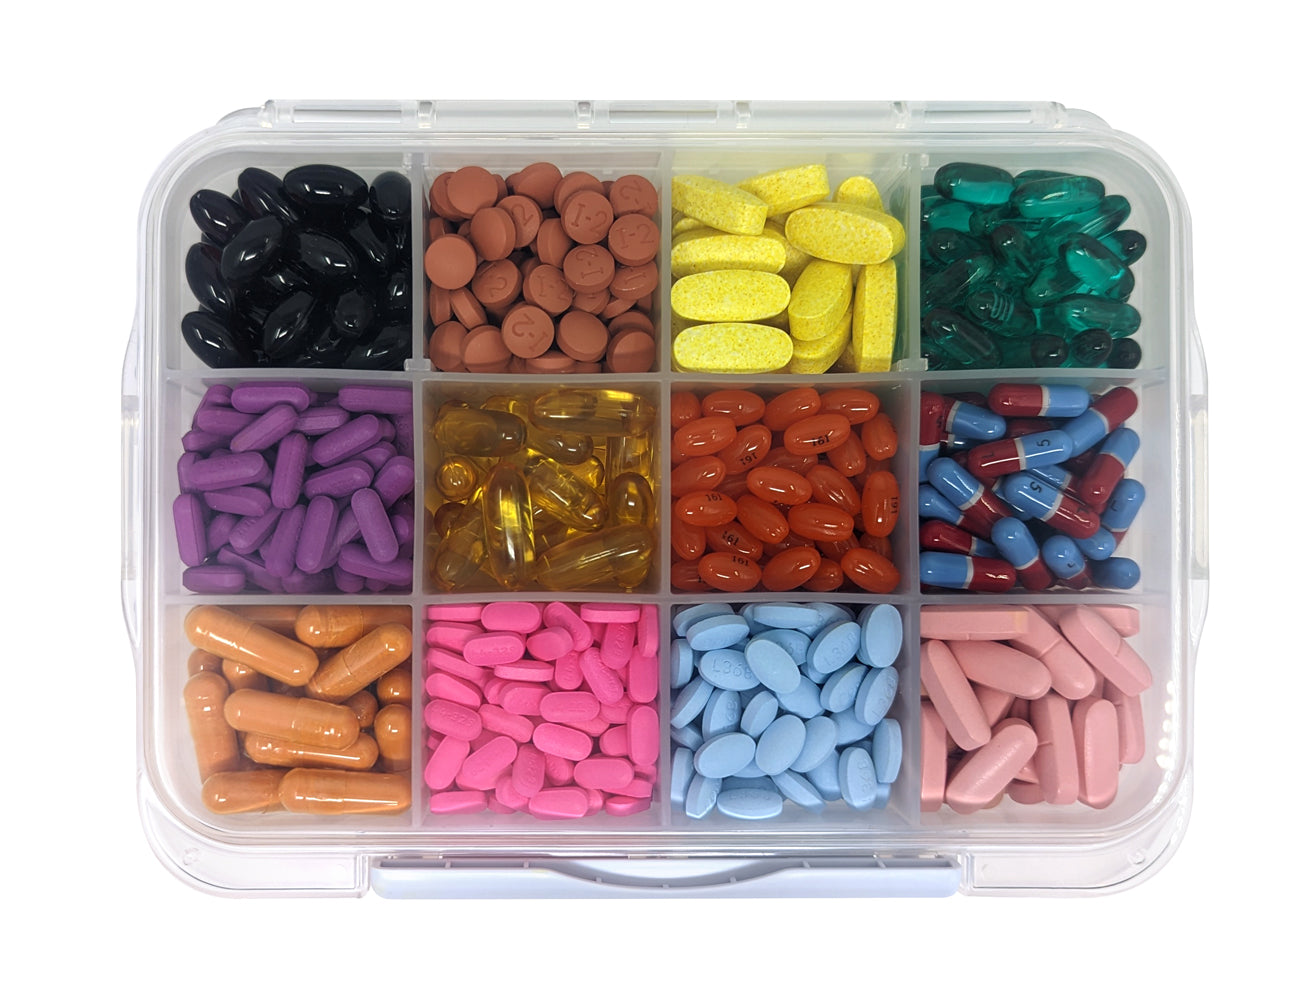 gms 12 Compartment Supplement Organizer with An Airtight and Waterproof Seal to Help with Vitamin Organization and Freshness - Large Pill Organizer